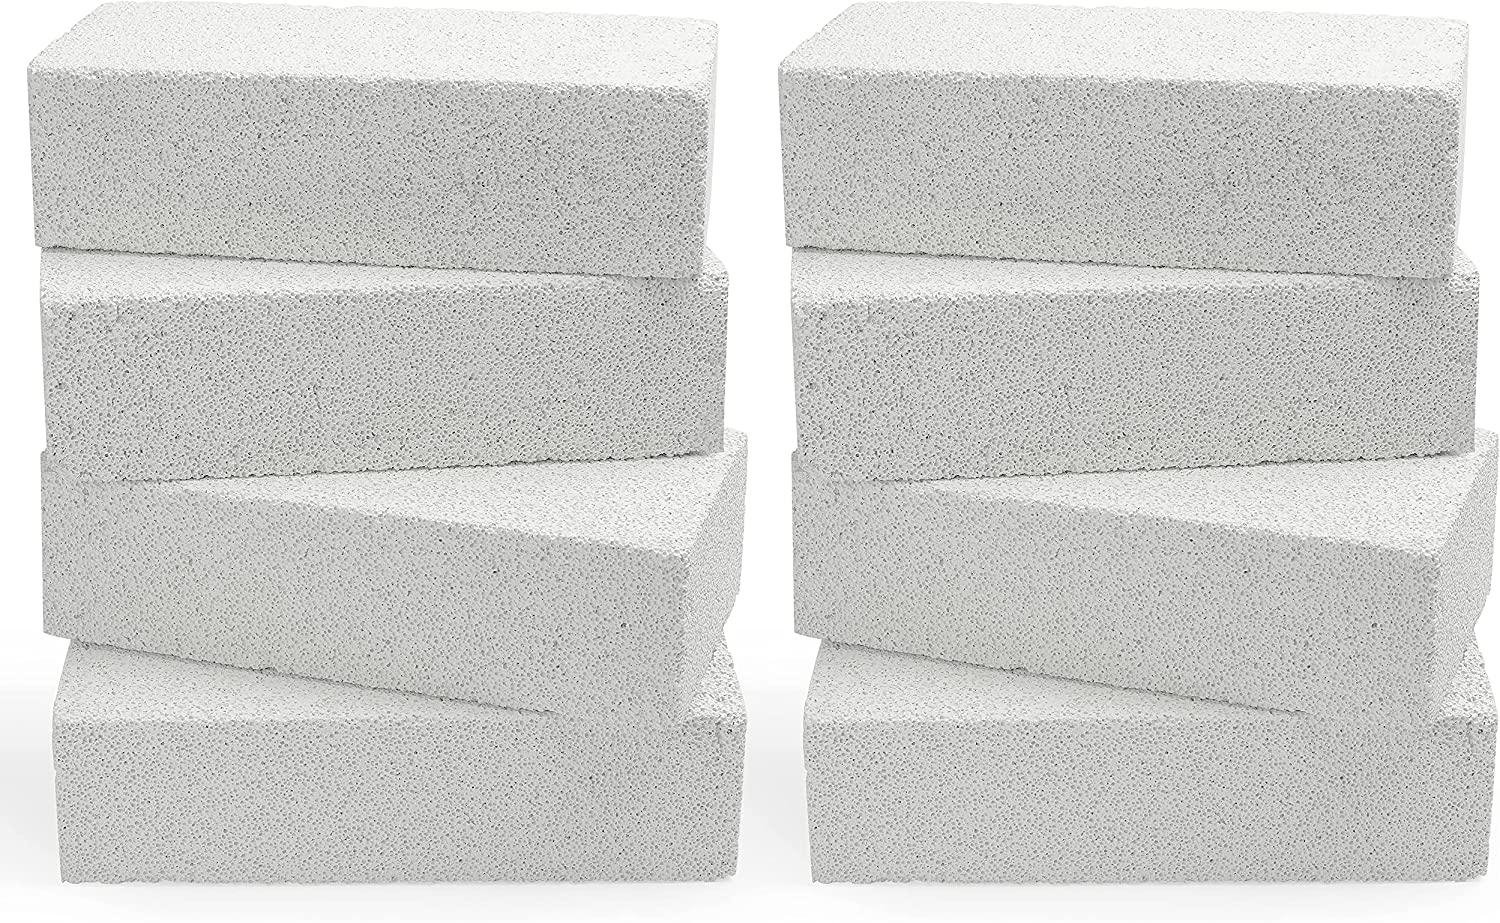 SIMOND STORE Insulating Fire Bricks, 2500F Rated, 1.25 Inch x 4.5 Inch x 9  Inch, Pack of 12, Soft Fire Bricks for Wood Stove Pizza Oven Fireplace